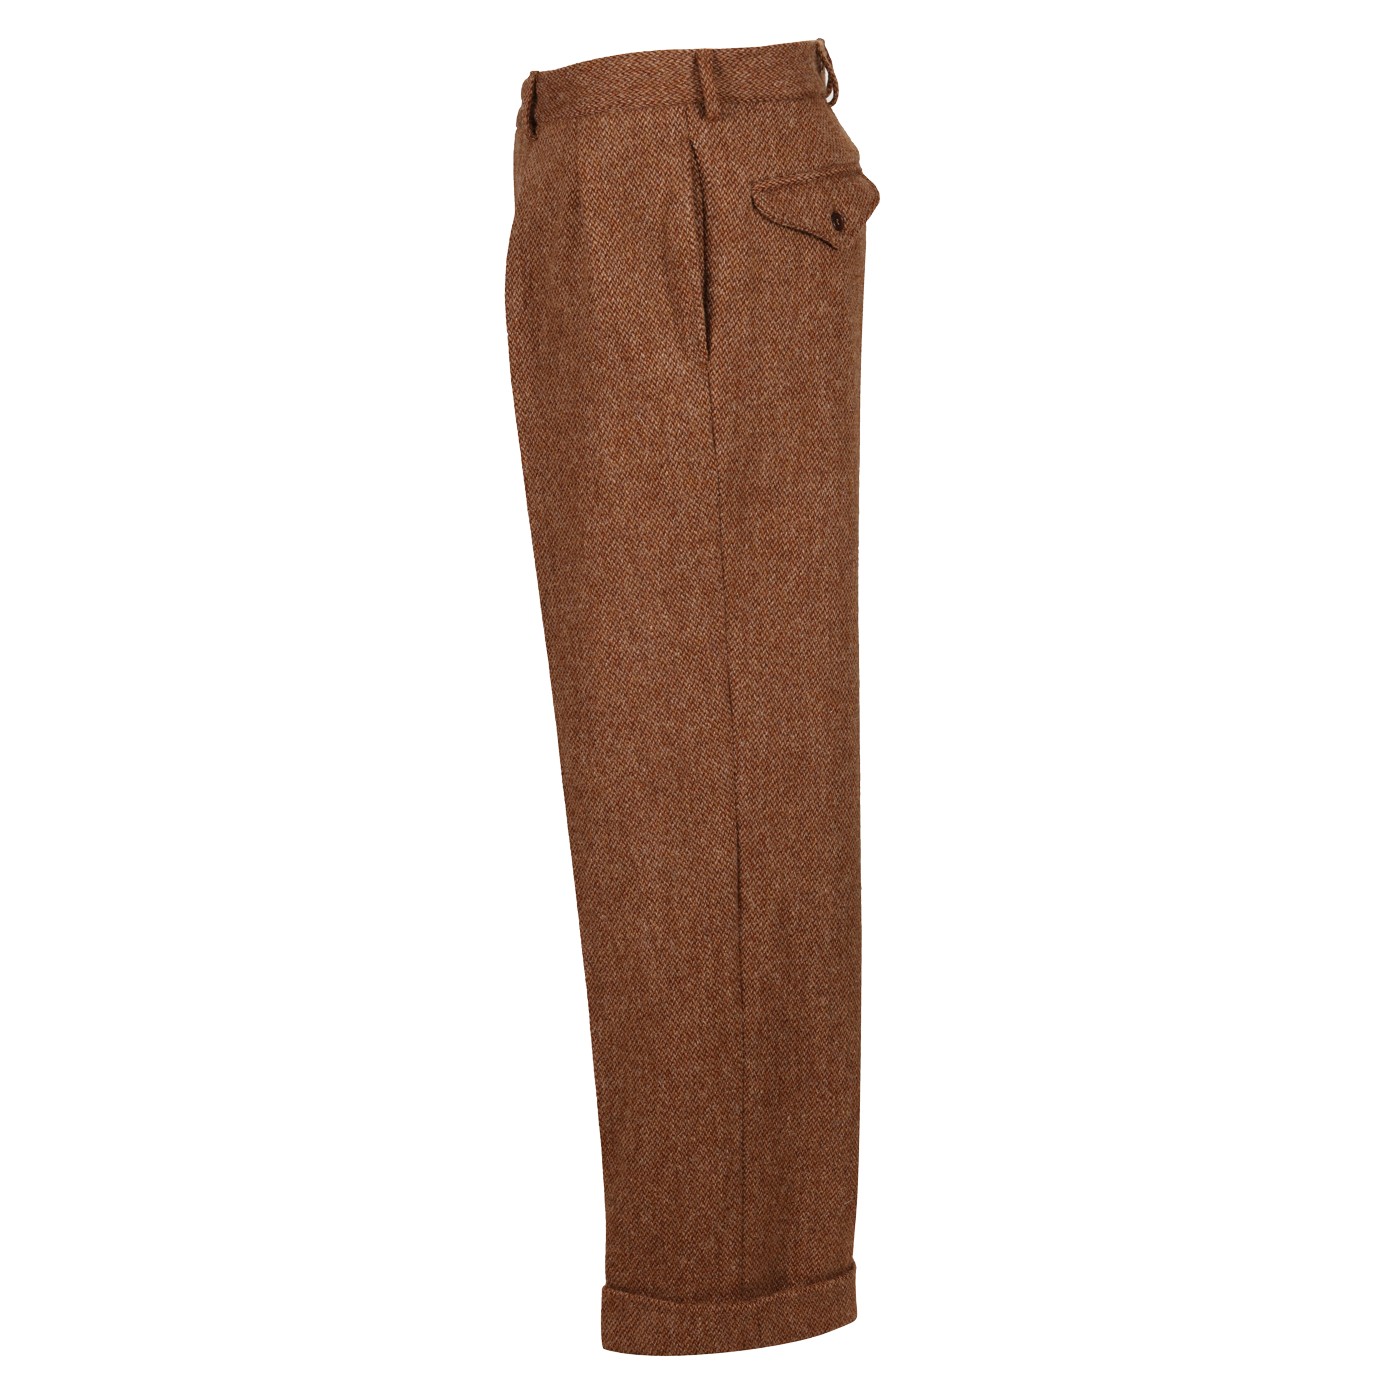 1940s Donegal tweed Trousers